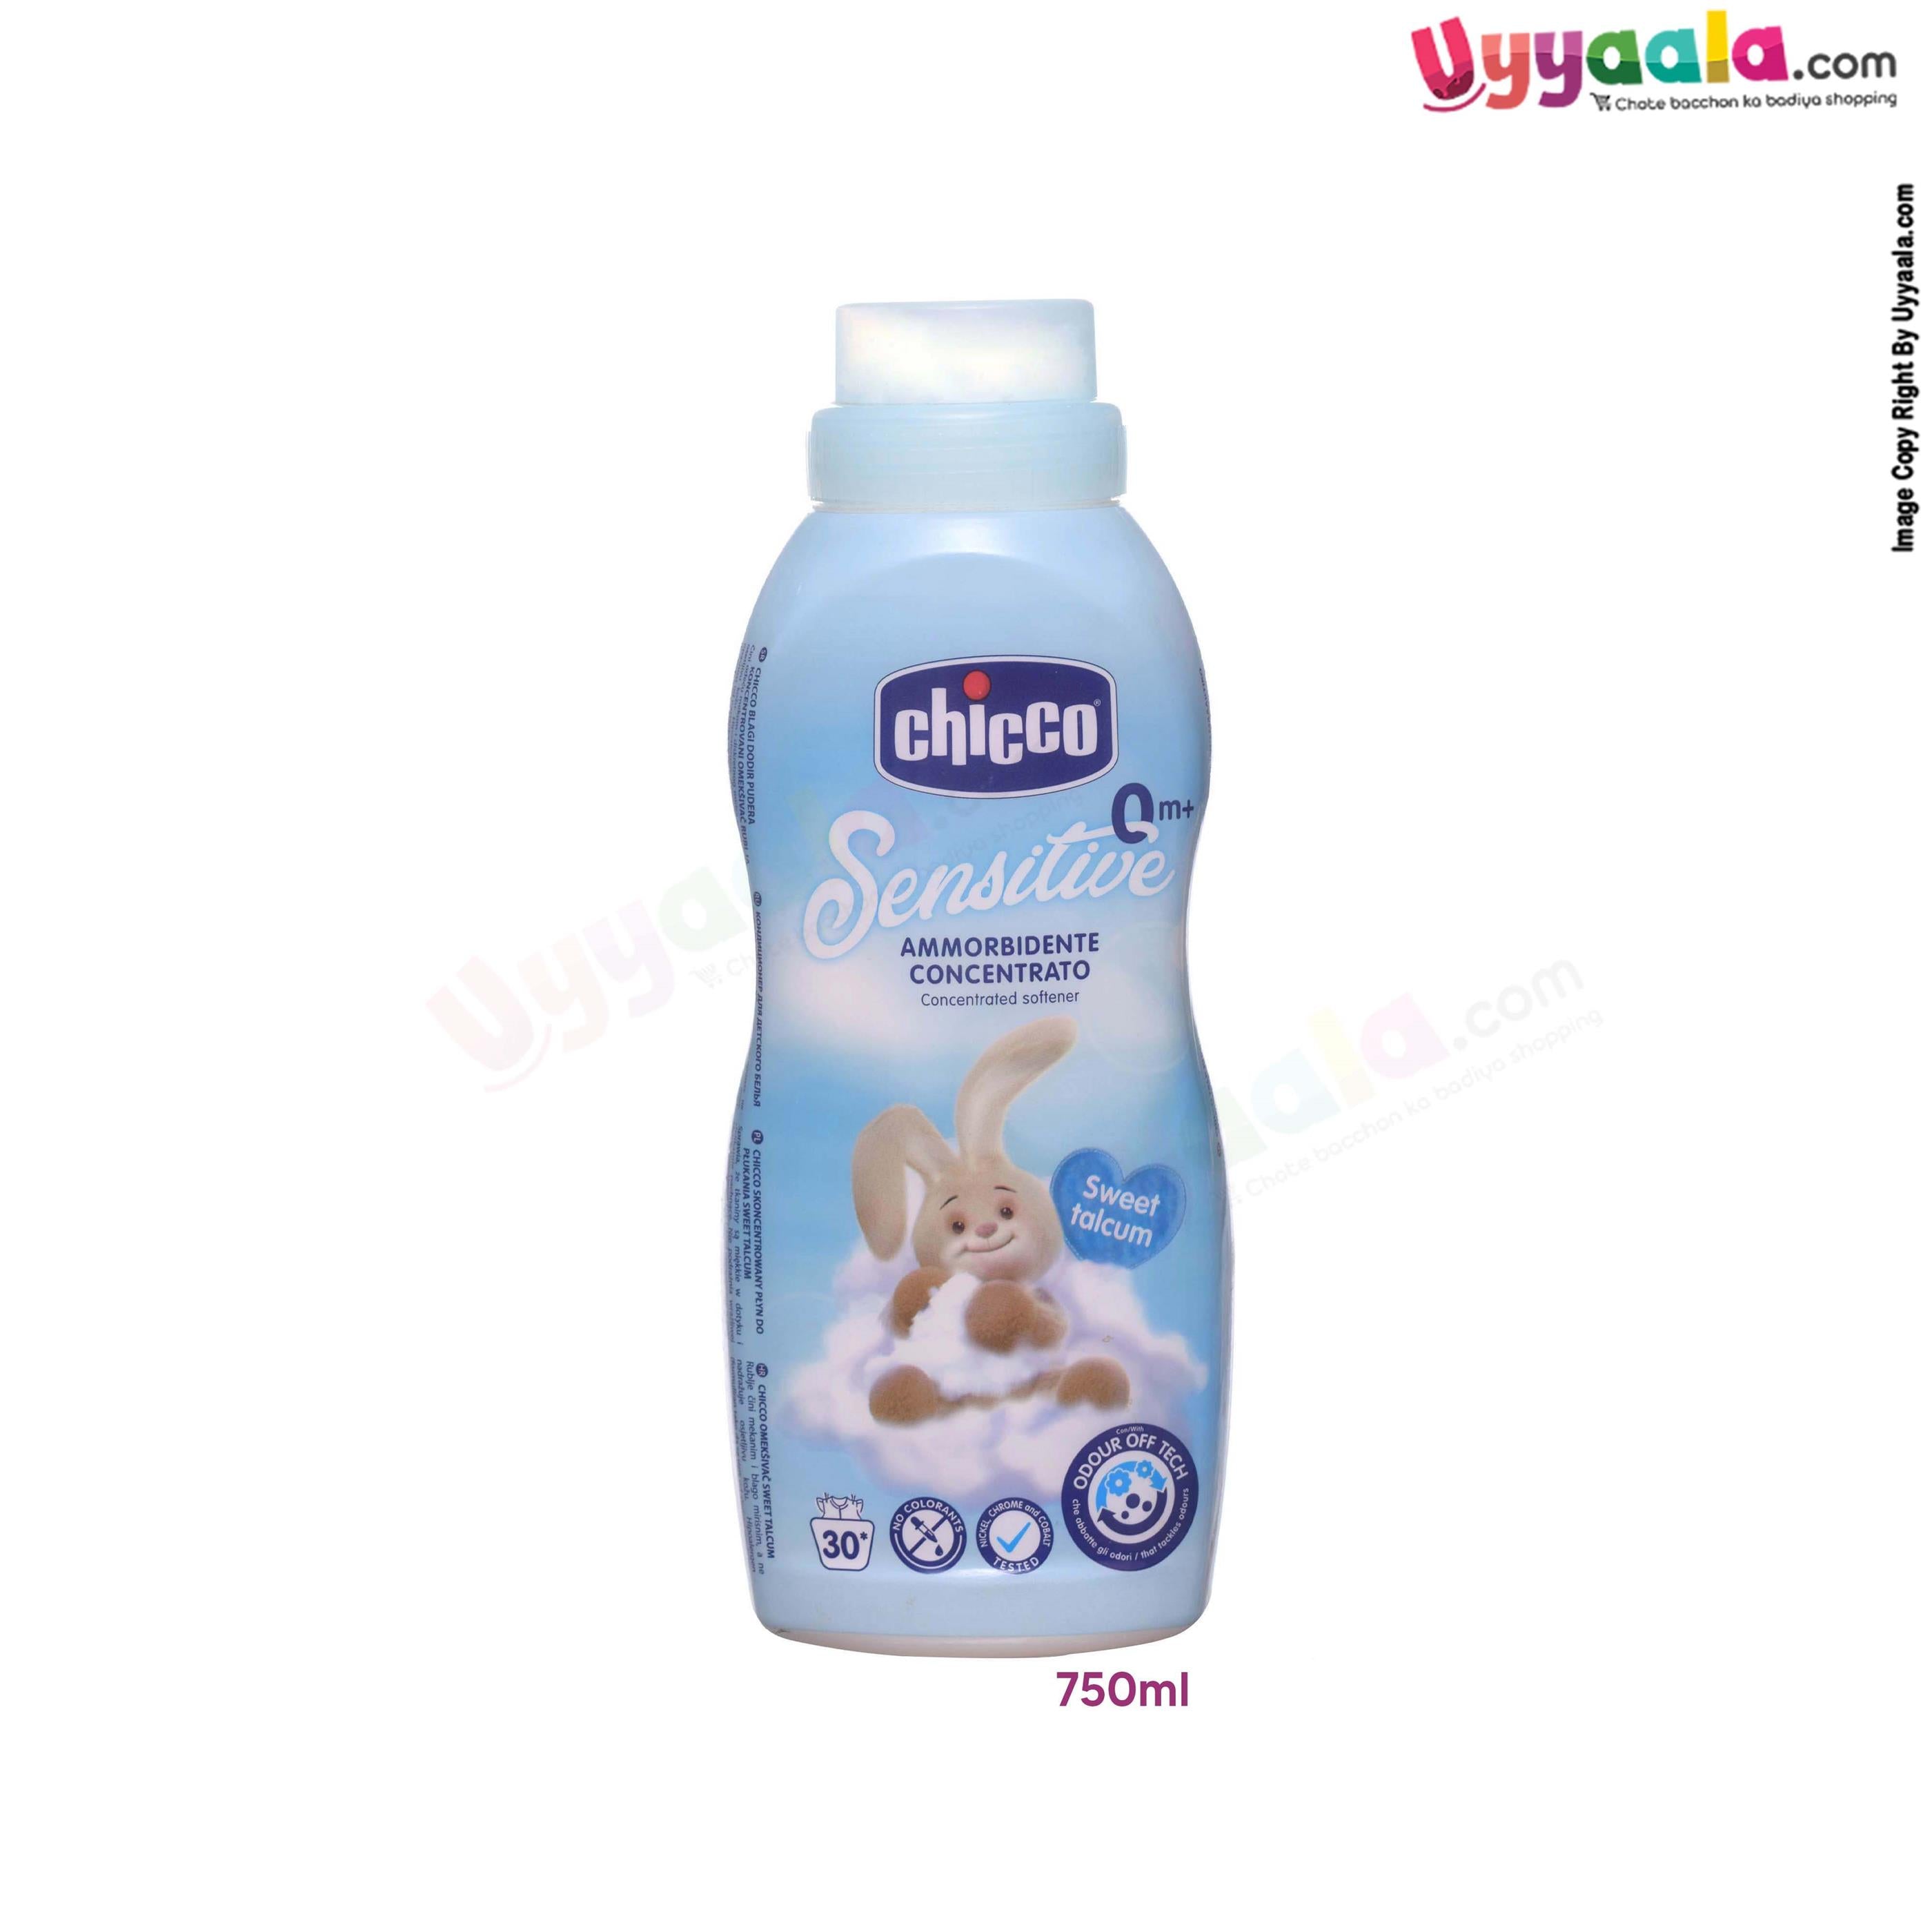 CHICOO Sensitive concentrated laundry softner, sweet talcum